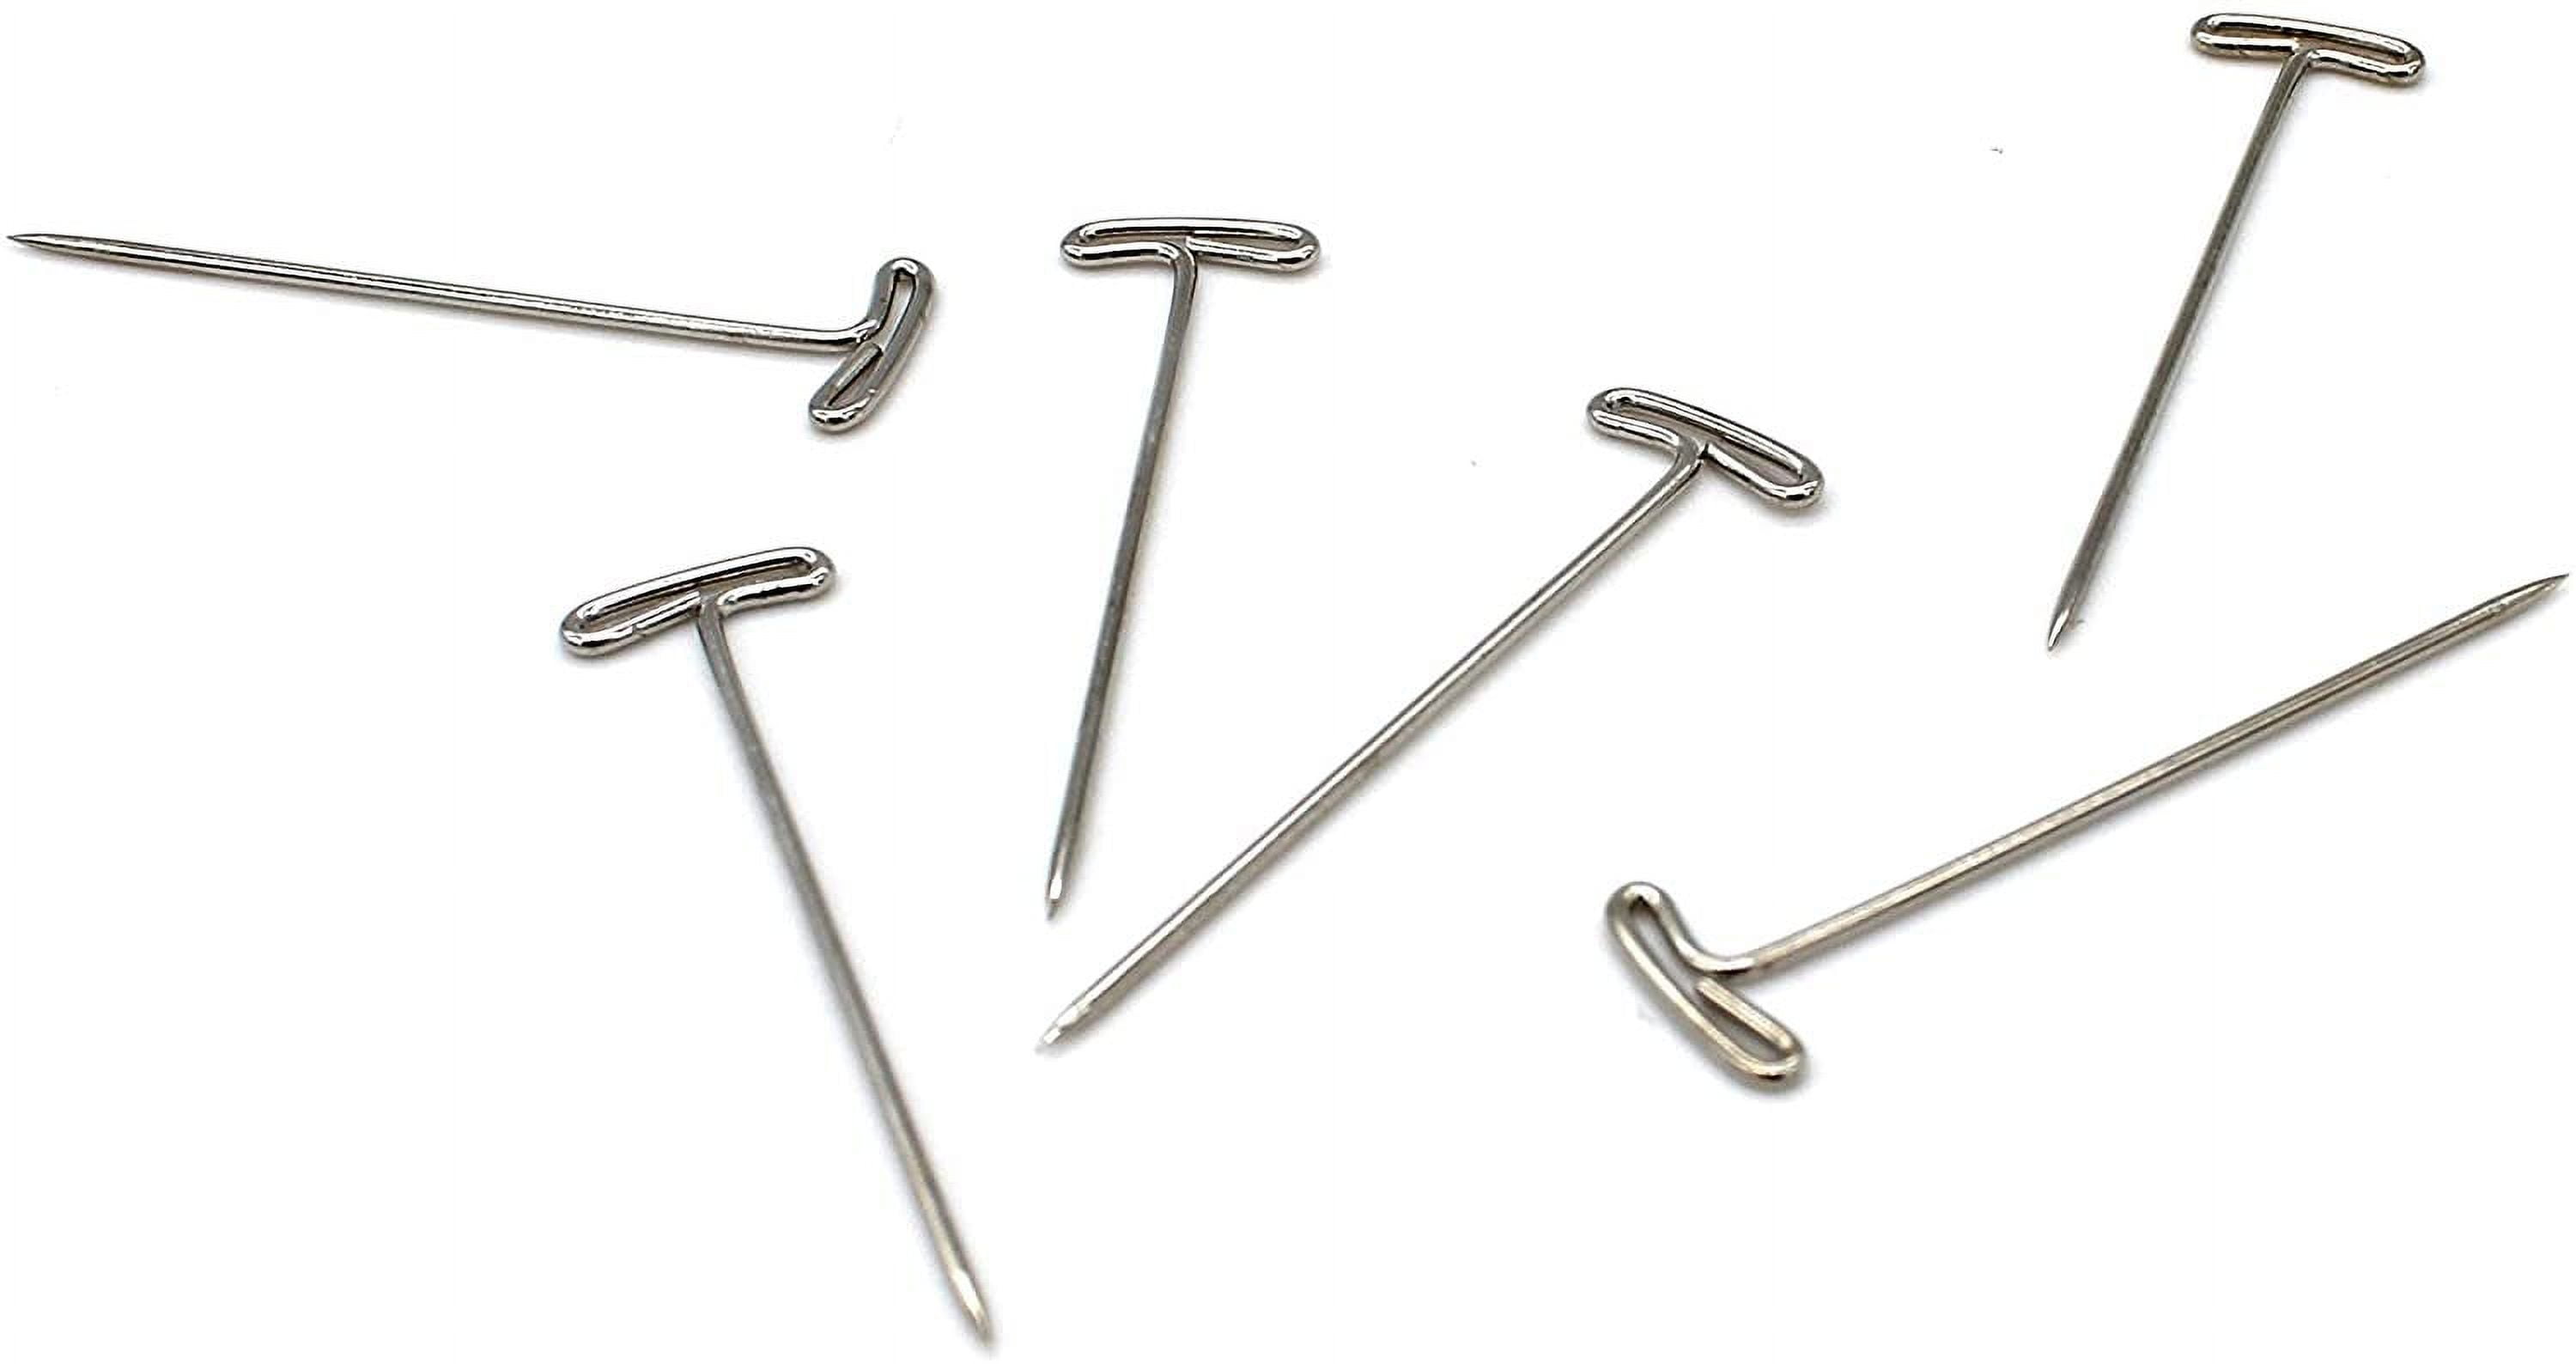 Metal Sewing Crimping Clip Stainless Steel Hemming Clips Shelike